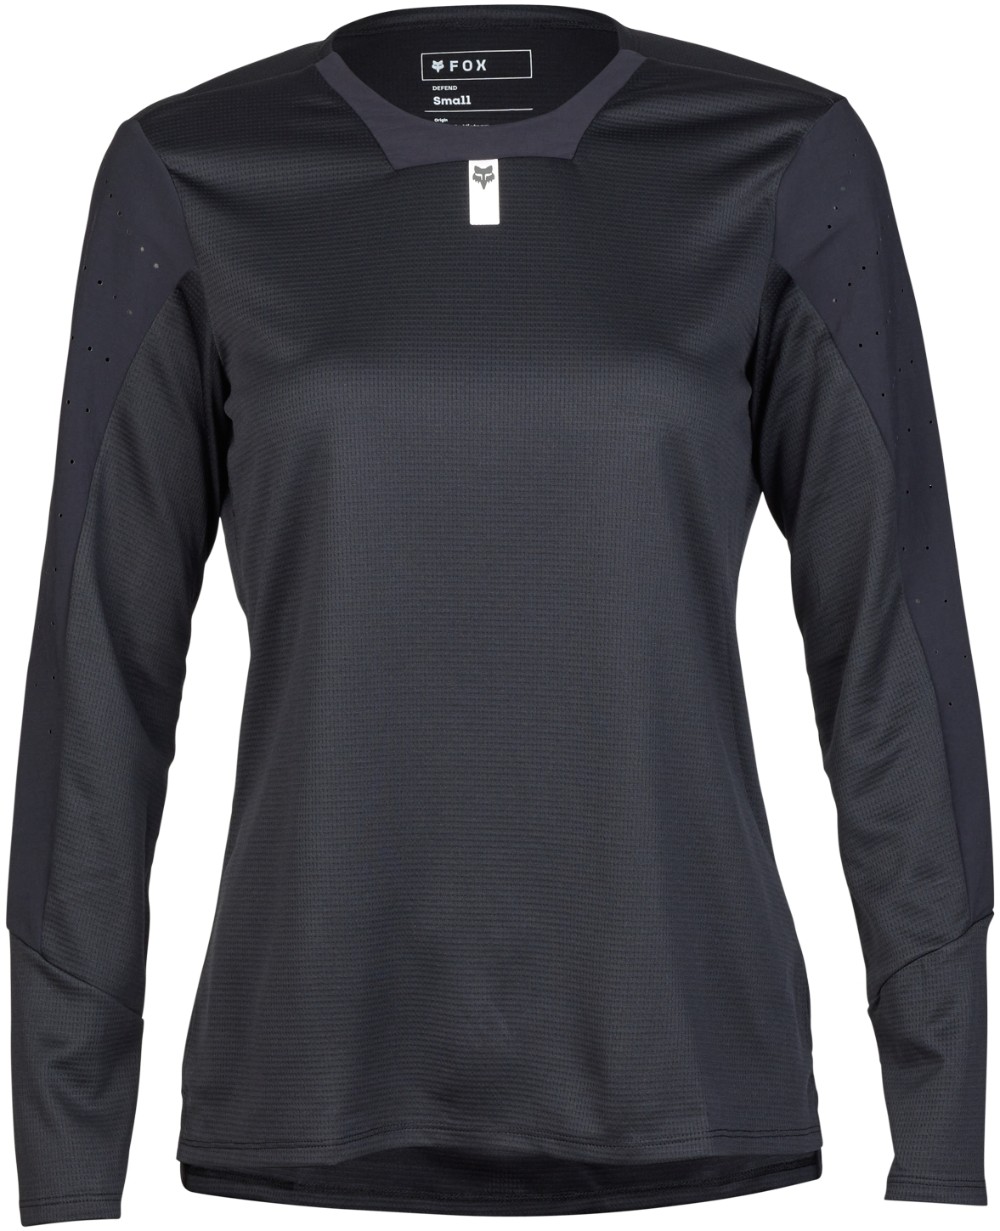 Defend Womens Long Sleeve MTB Jersey image 0